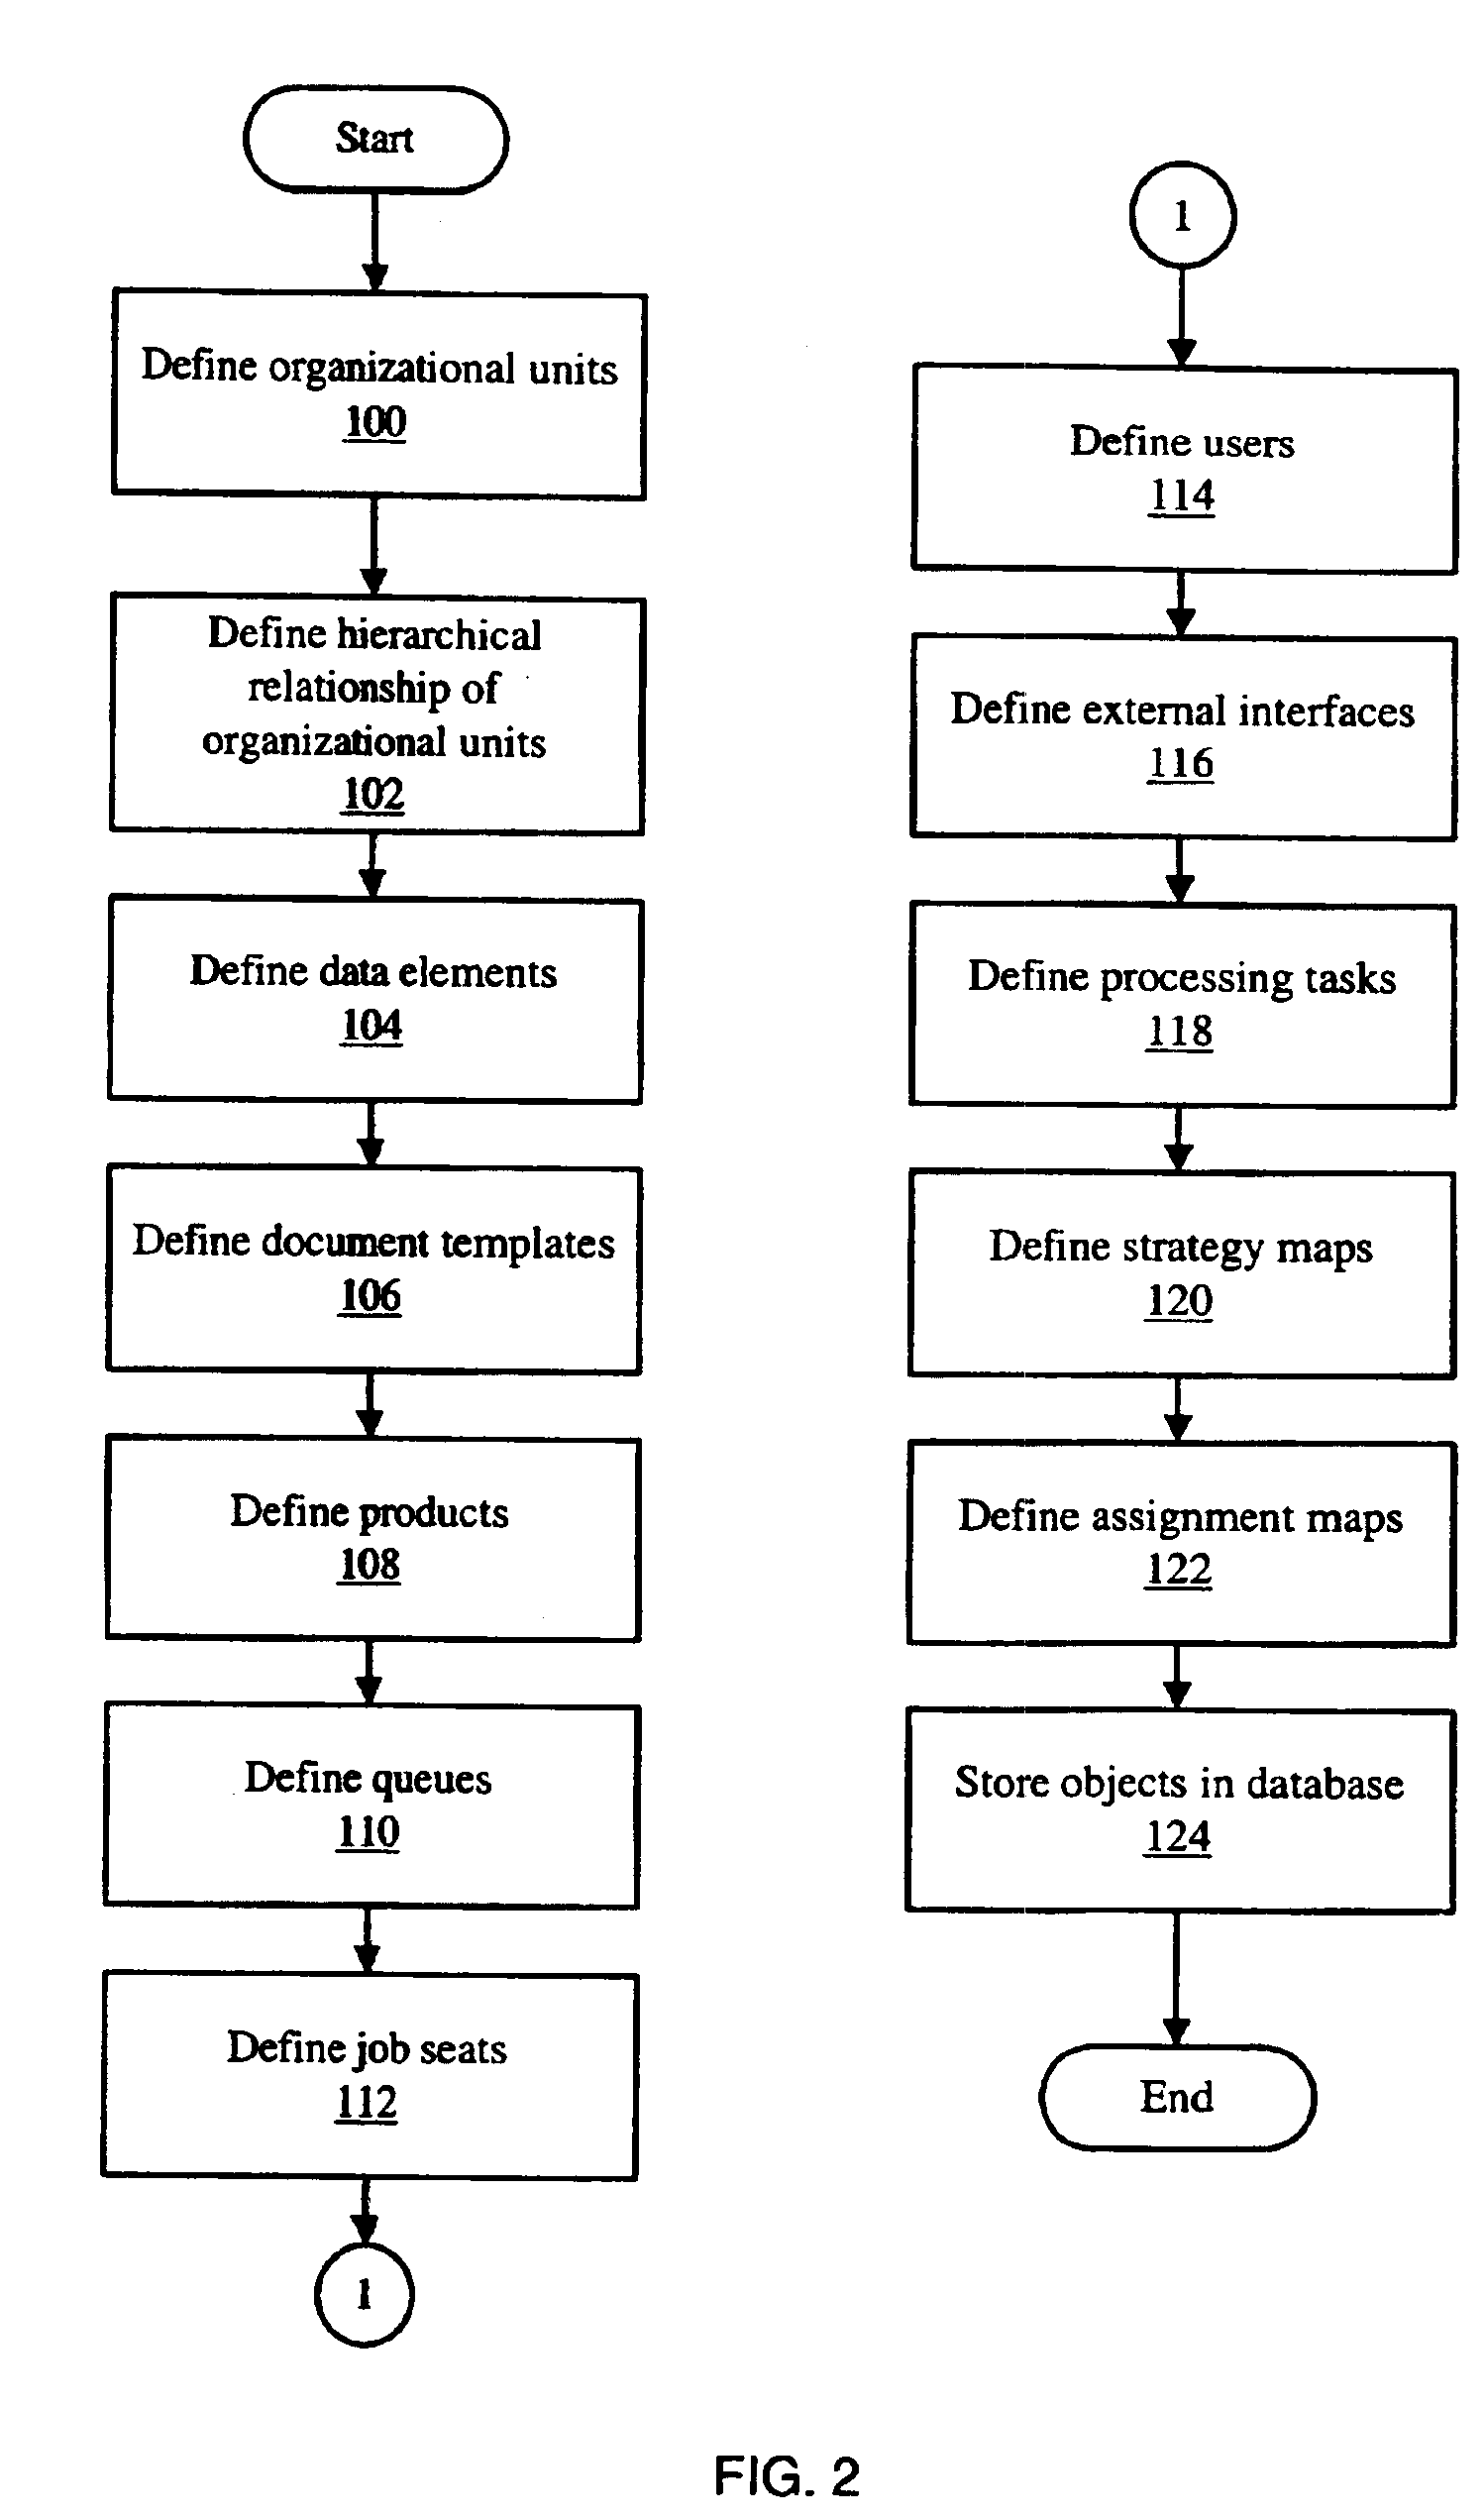 External interface for requesting data from remote systems in a generic fashion